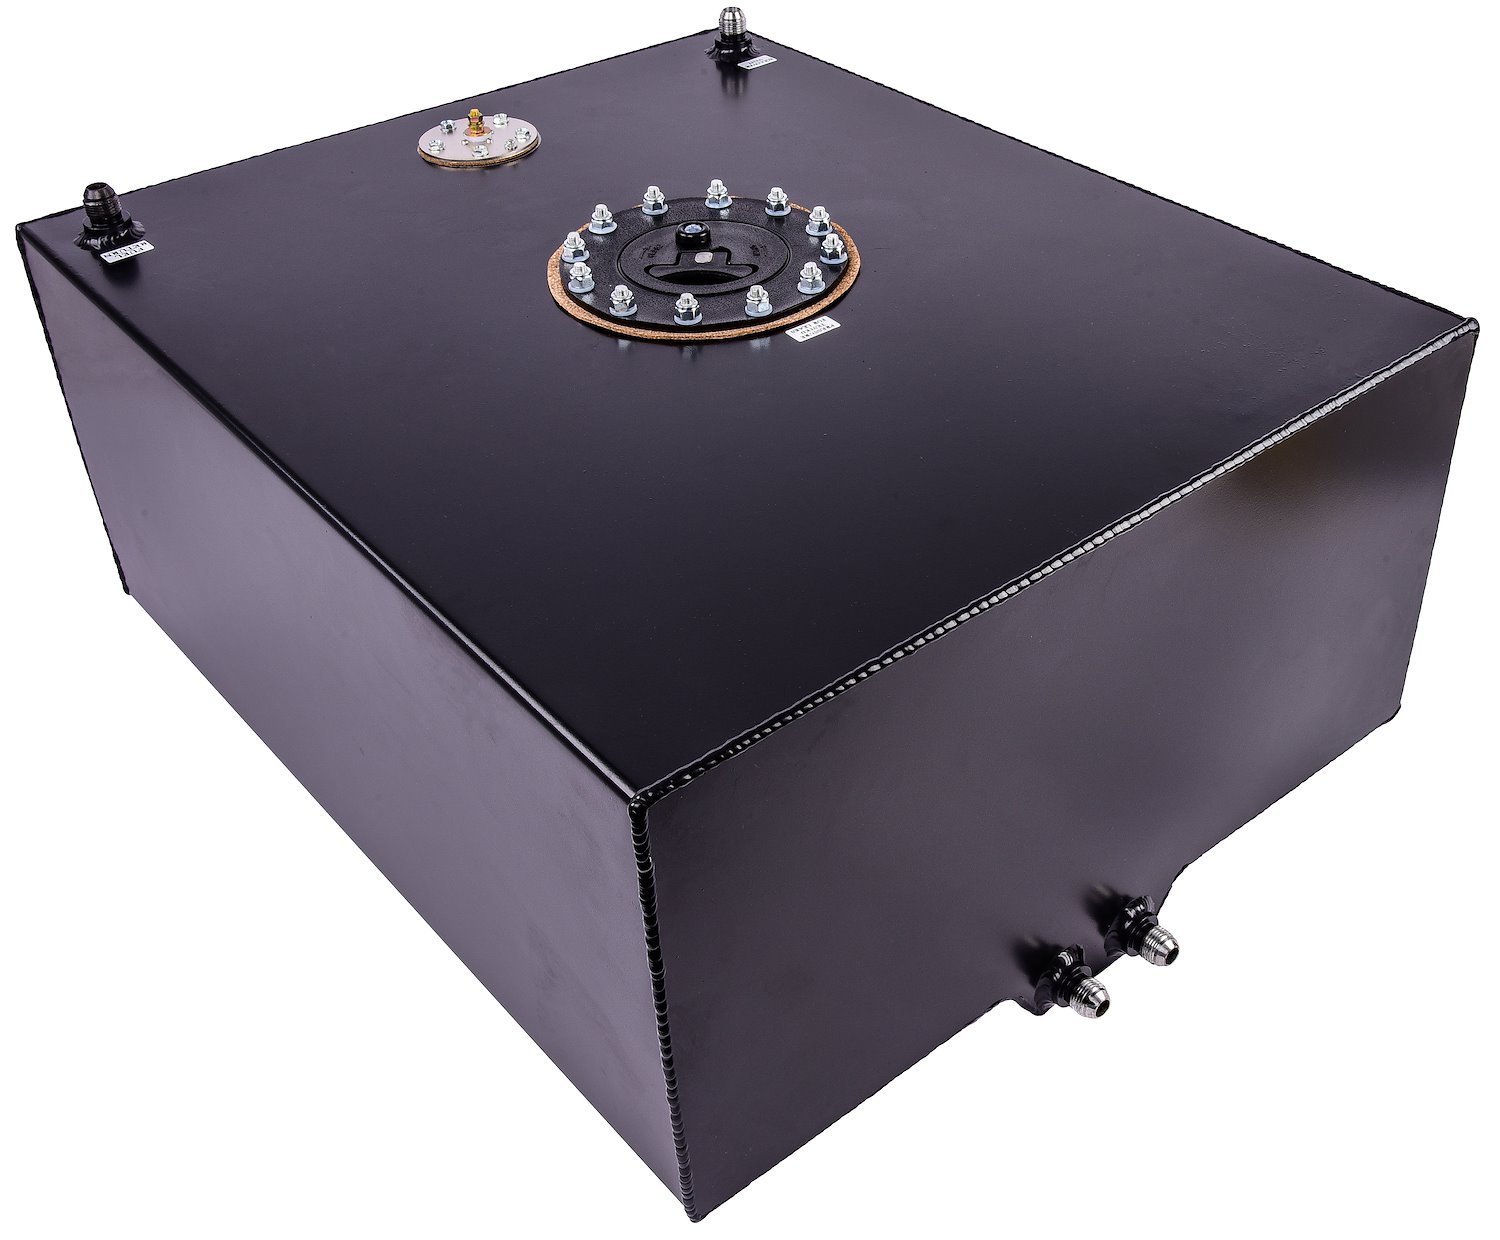 20 Gallon Fuel Cell with Sending Unit [Black Powder-Coated FInish]